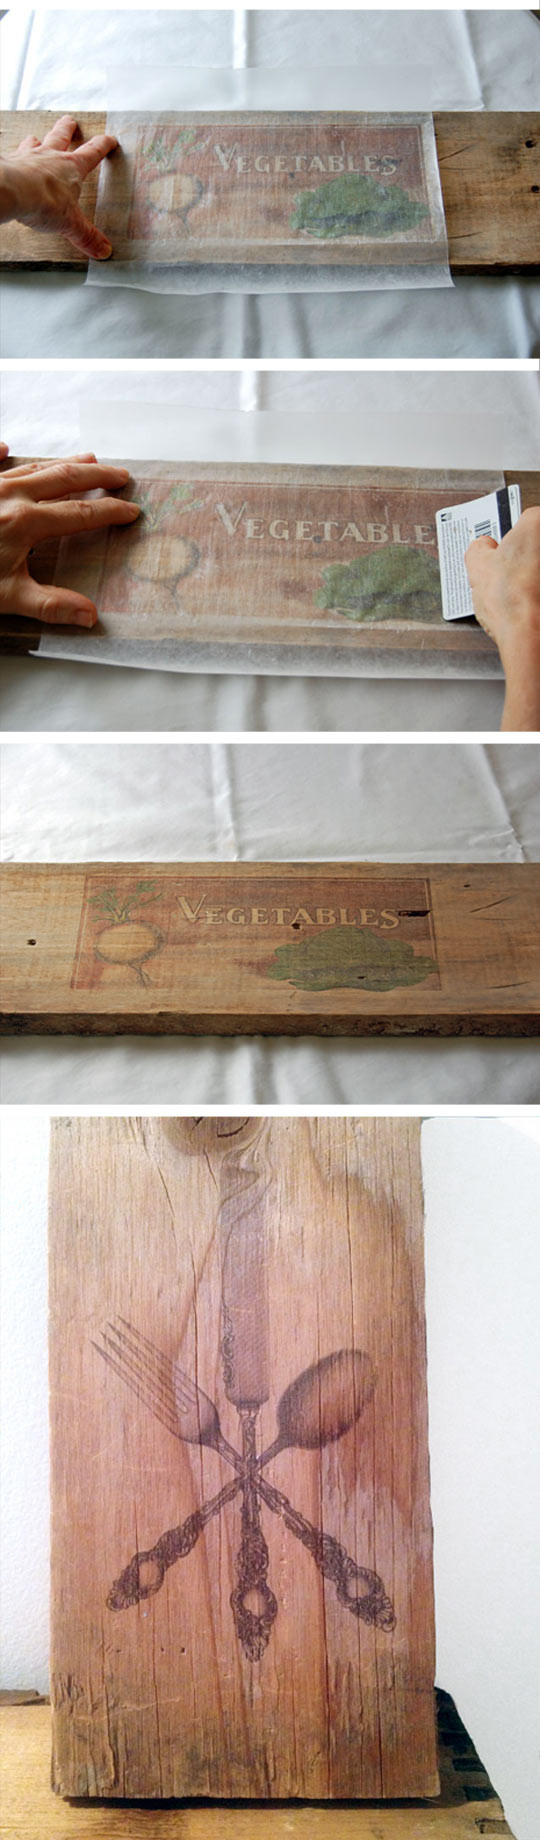 DIY Printing On Wood
 15 Wax Paper Transfer Tutorials to Wood Glass & Canvas